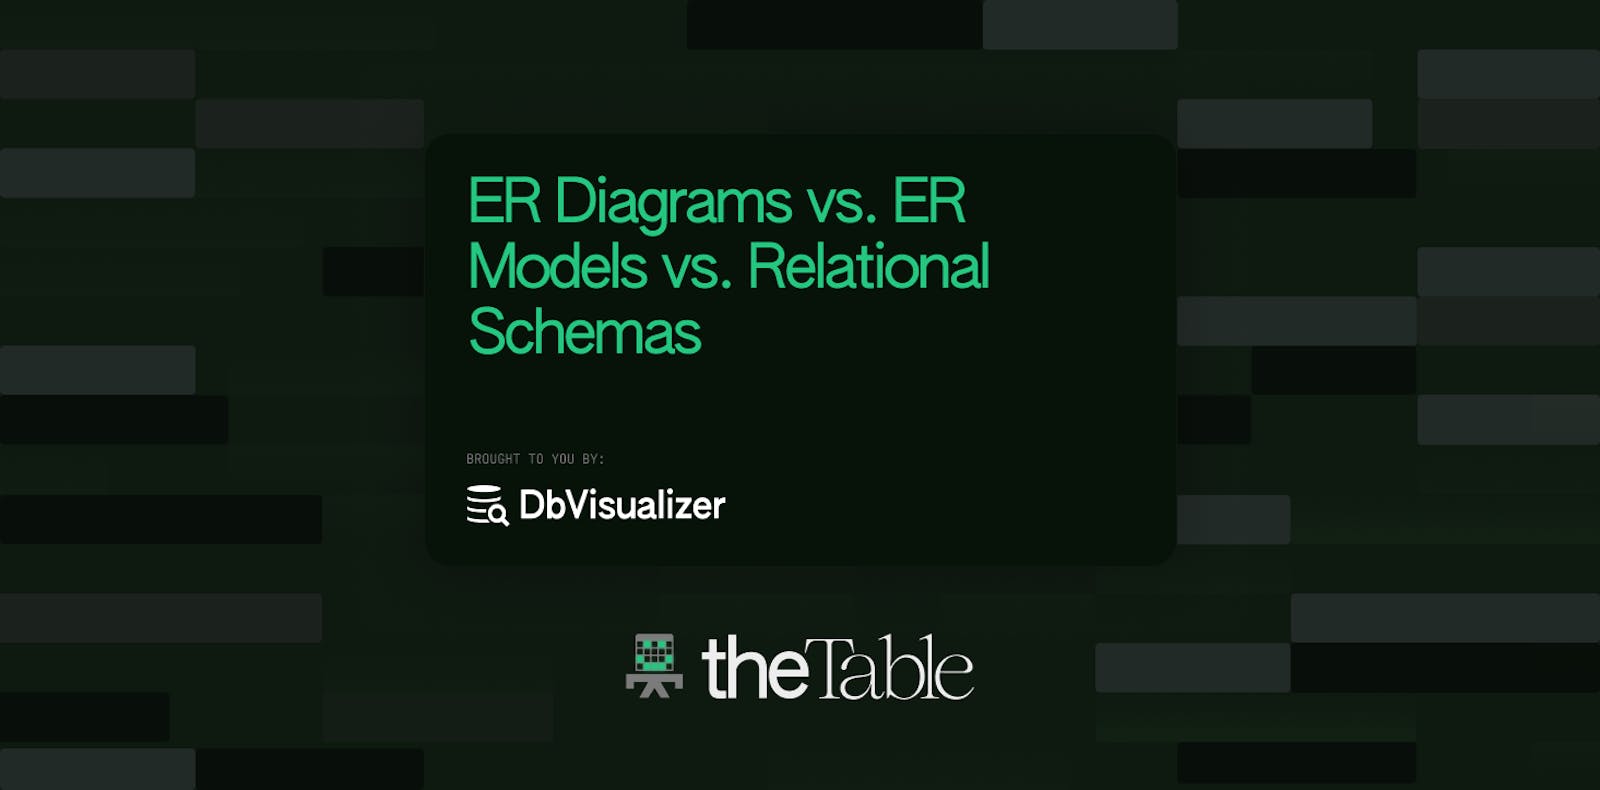 ER Model, ER Diagram, and Relational Schema: What's the Difference?